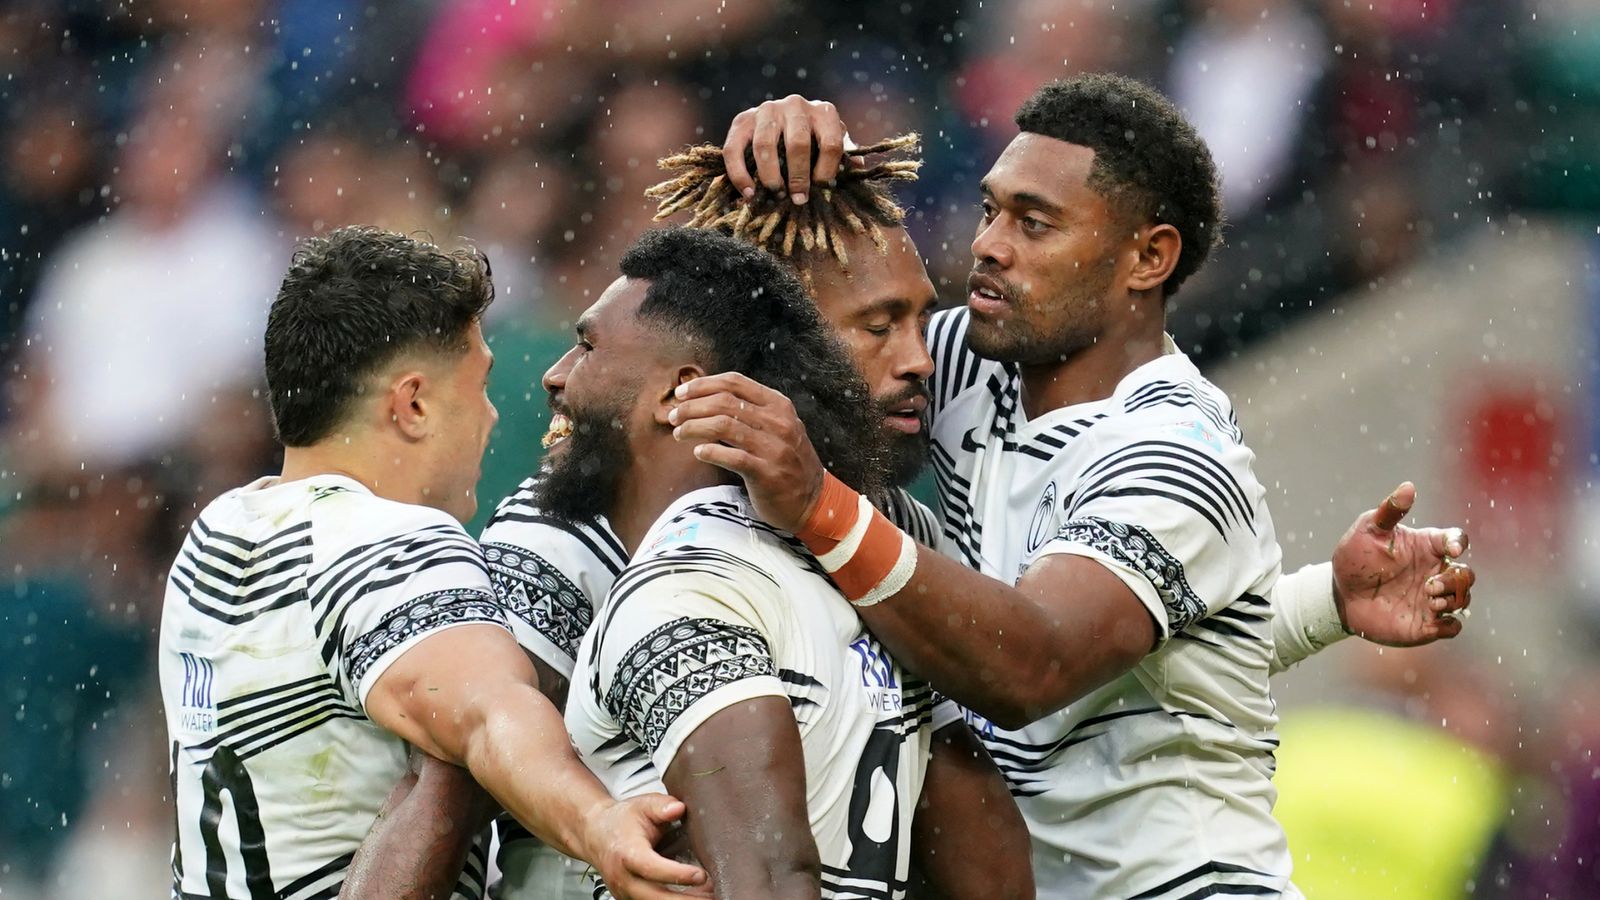 England 22-30 Fiji: Fijians secure first victory over England in final World Cup warm-up match